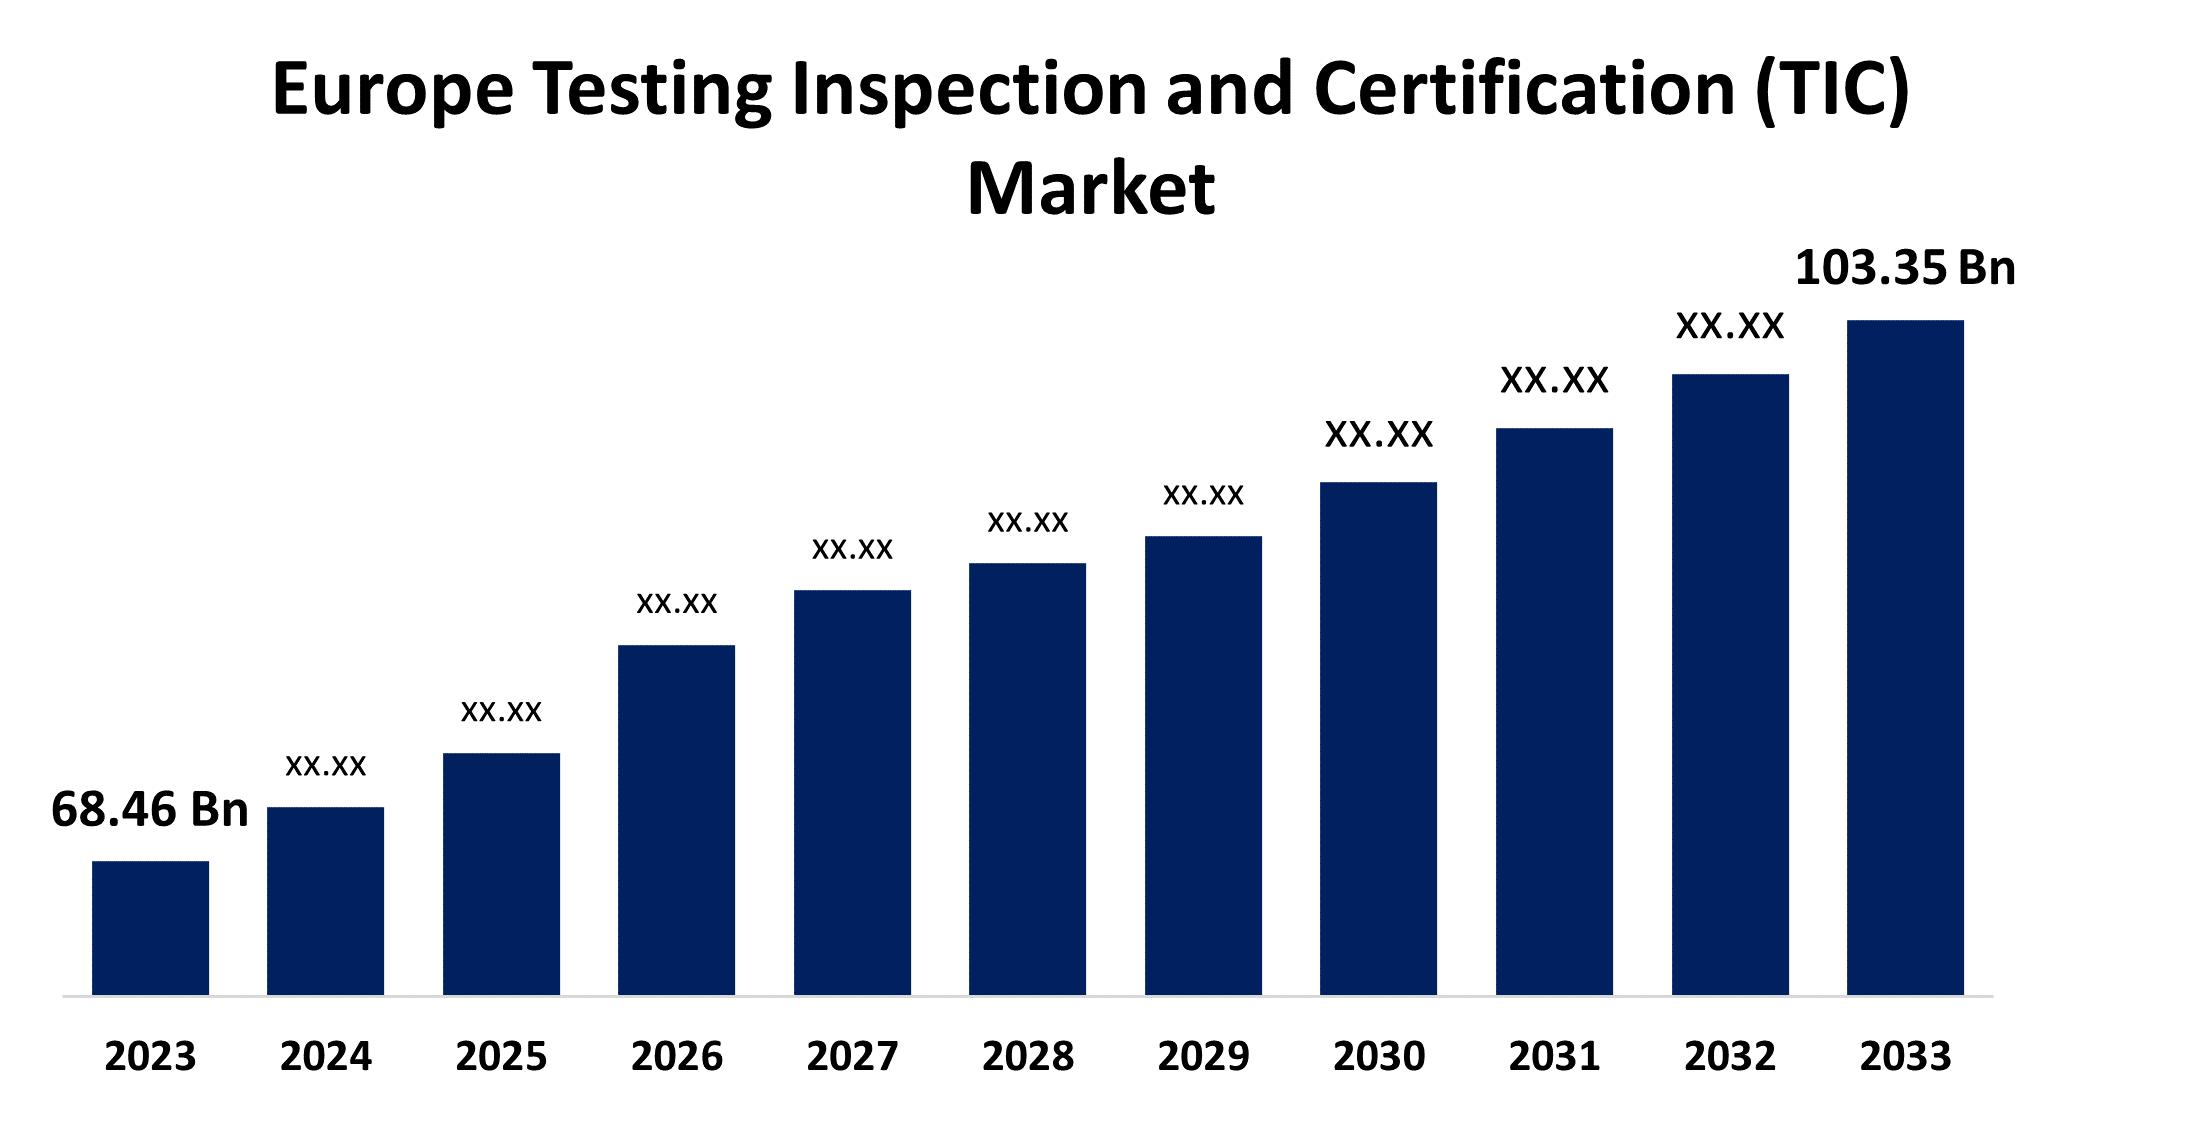 Europe Testing Inspection and Certification (TIC) Market